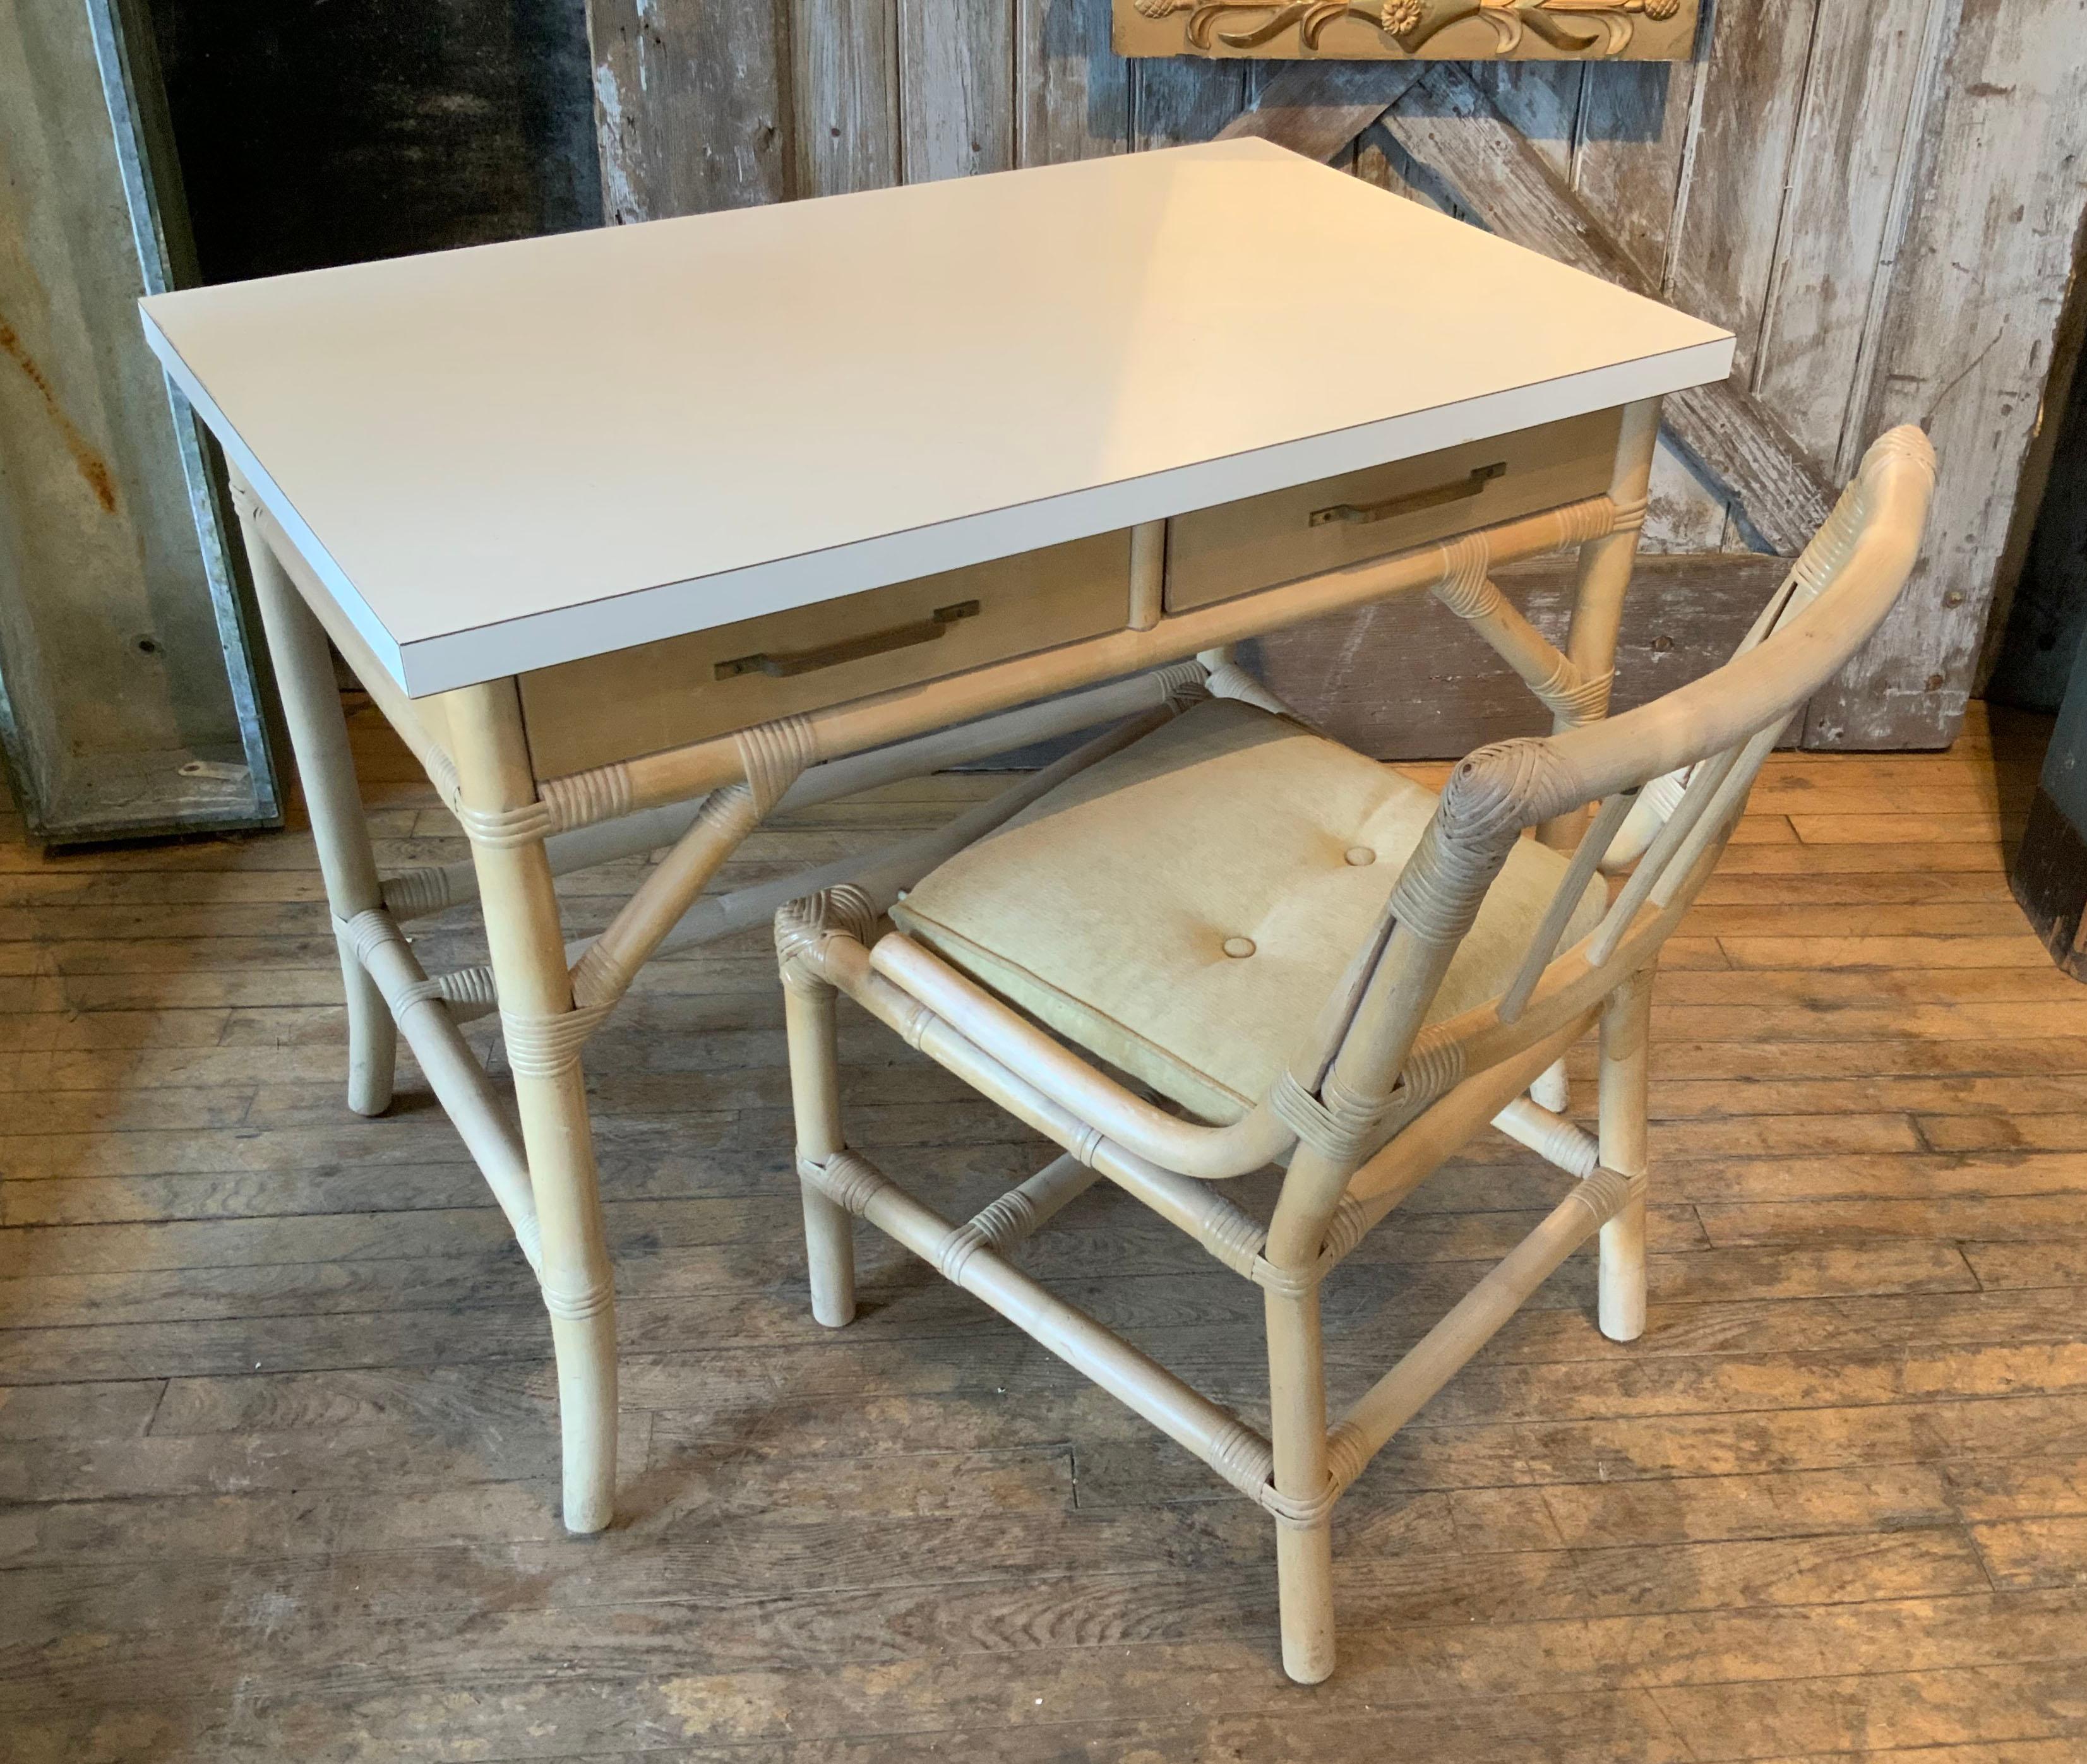 A very nice vintage 1960's rattan frame writing desk designed by Tommi Parzinger for Willow & Reed. charming design and details, with two slim drawers with the original brass hardware, and a laminate writing surface. the desk has its original